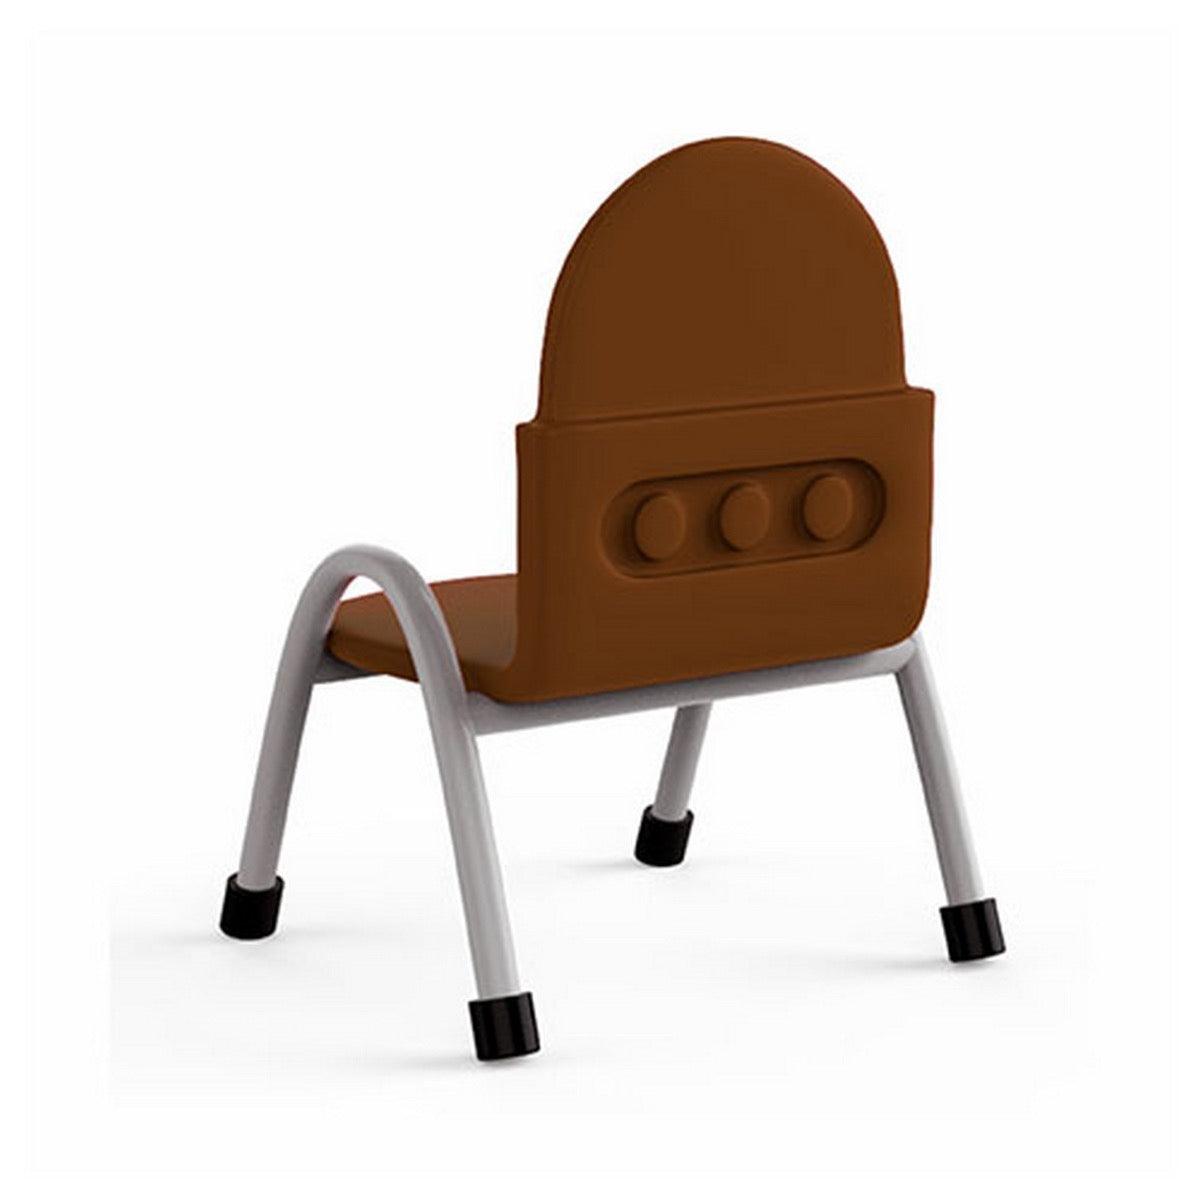 Ok Play Robo Chair, Study Chair, Sturdy And Durable Chair, Plastic Chair, Perfect For Home, Creches And School, Brown, 5 to 10 Years, Height 10 Inches